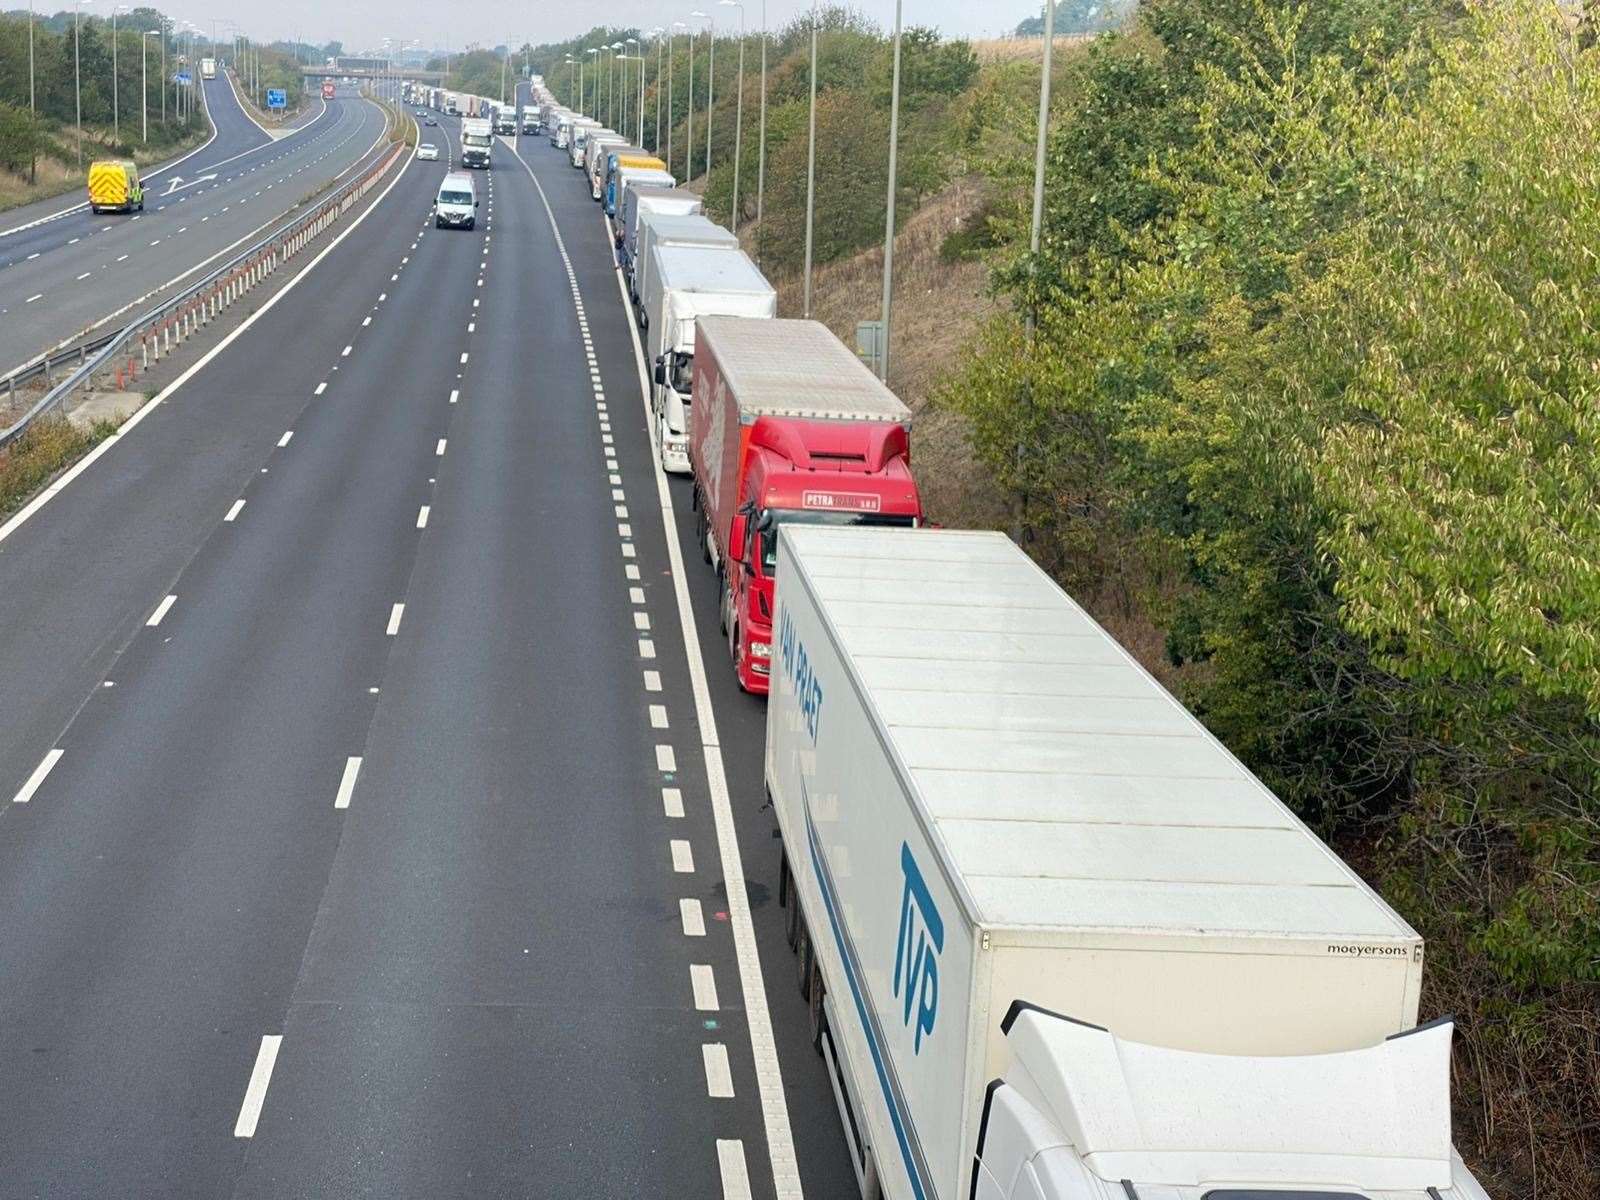 The government is erecting the 'internal border' in a bid to prevent the county grinding to a halt